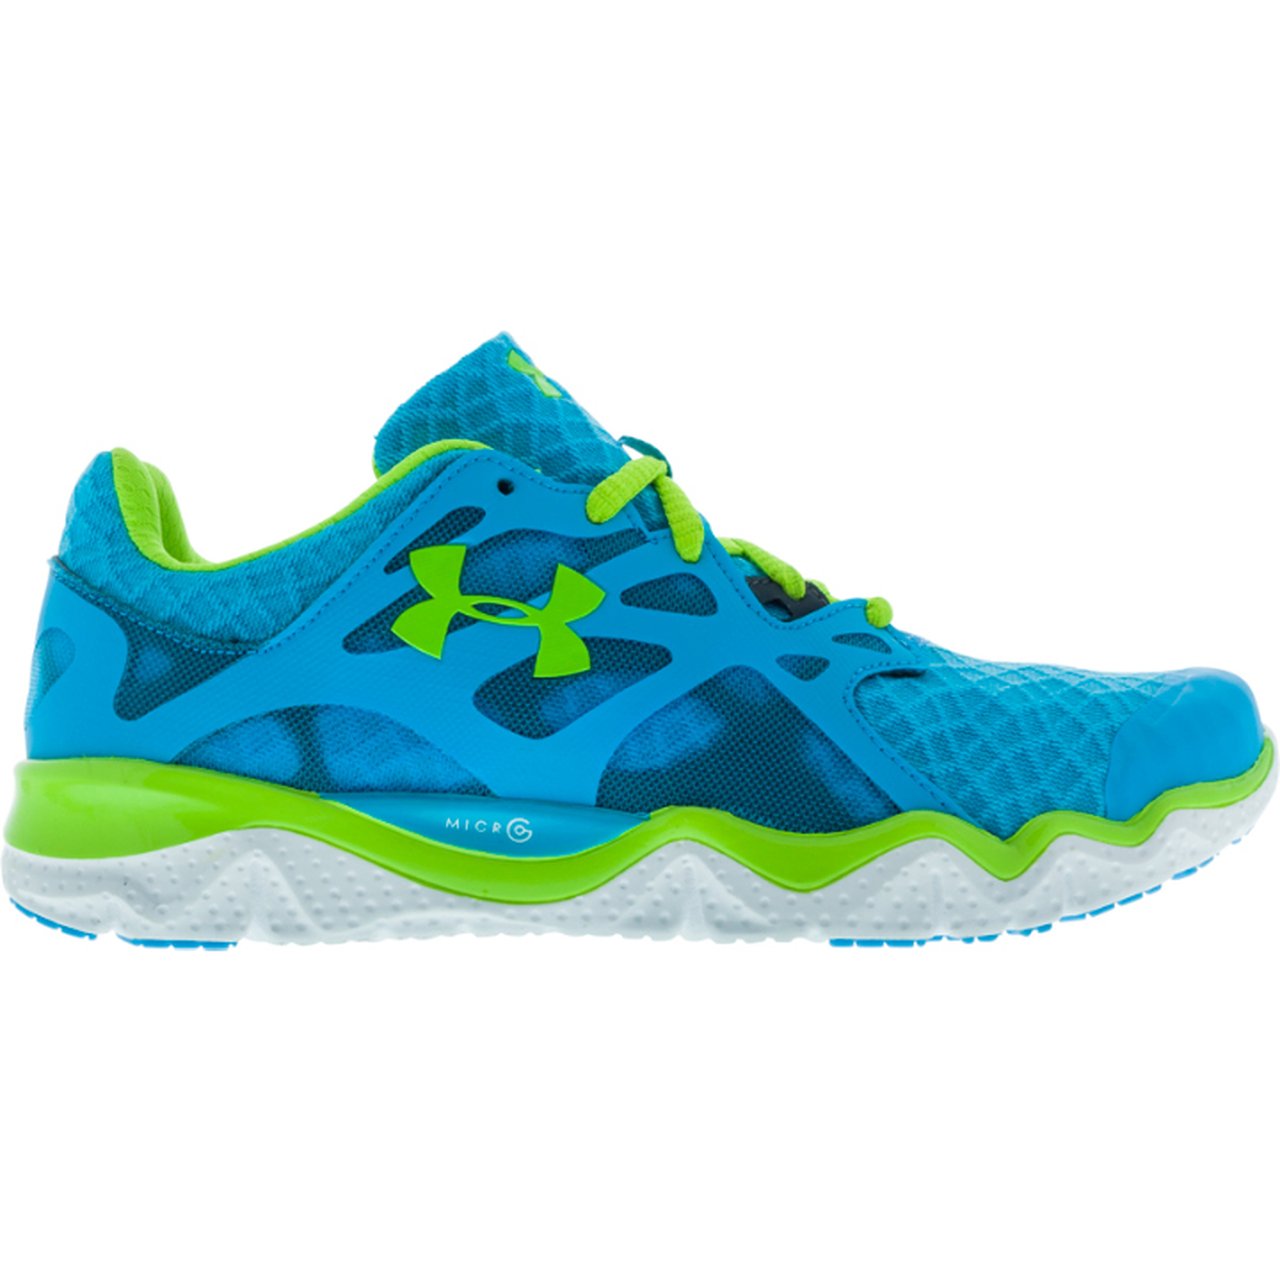 Under Armour Micro G Monza Running Shoes in Pirate Blue Hyper Green White.jpg